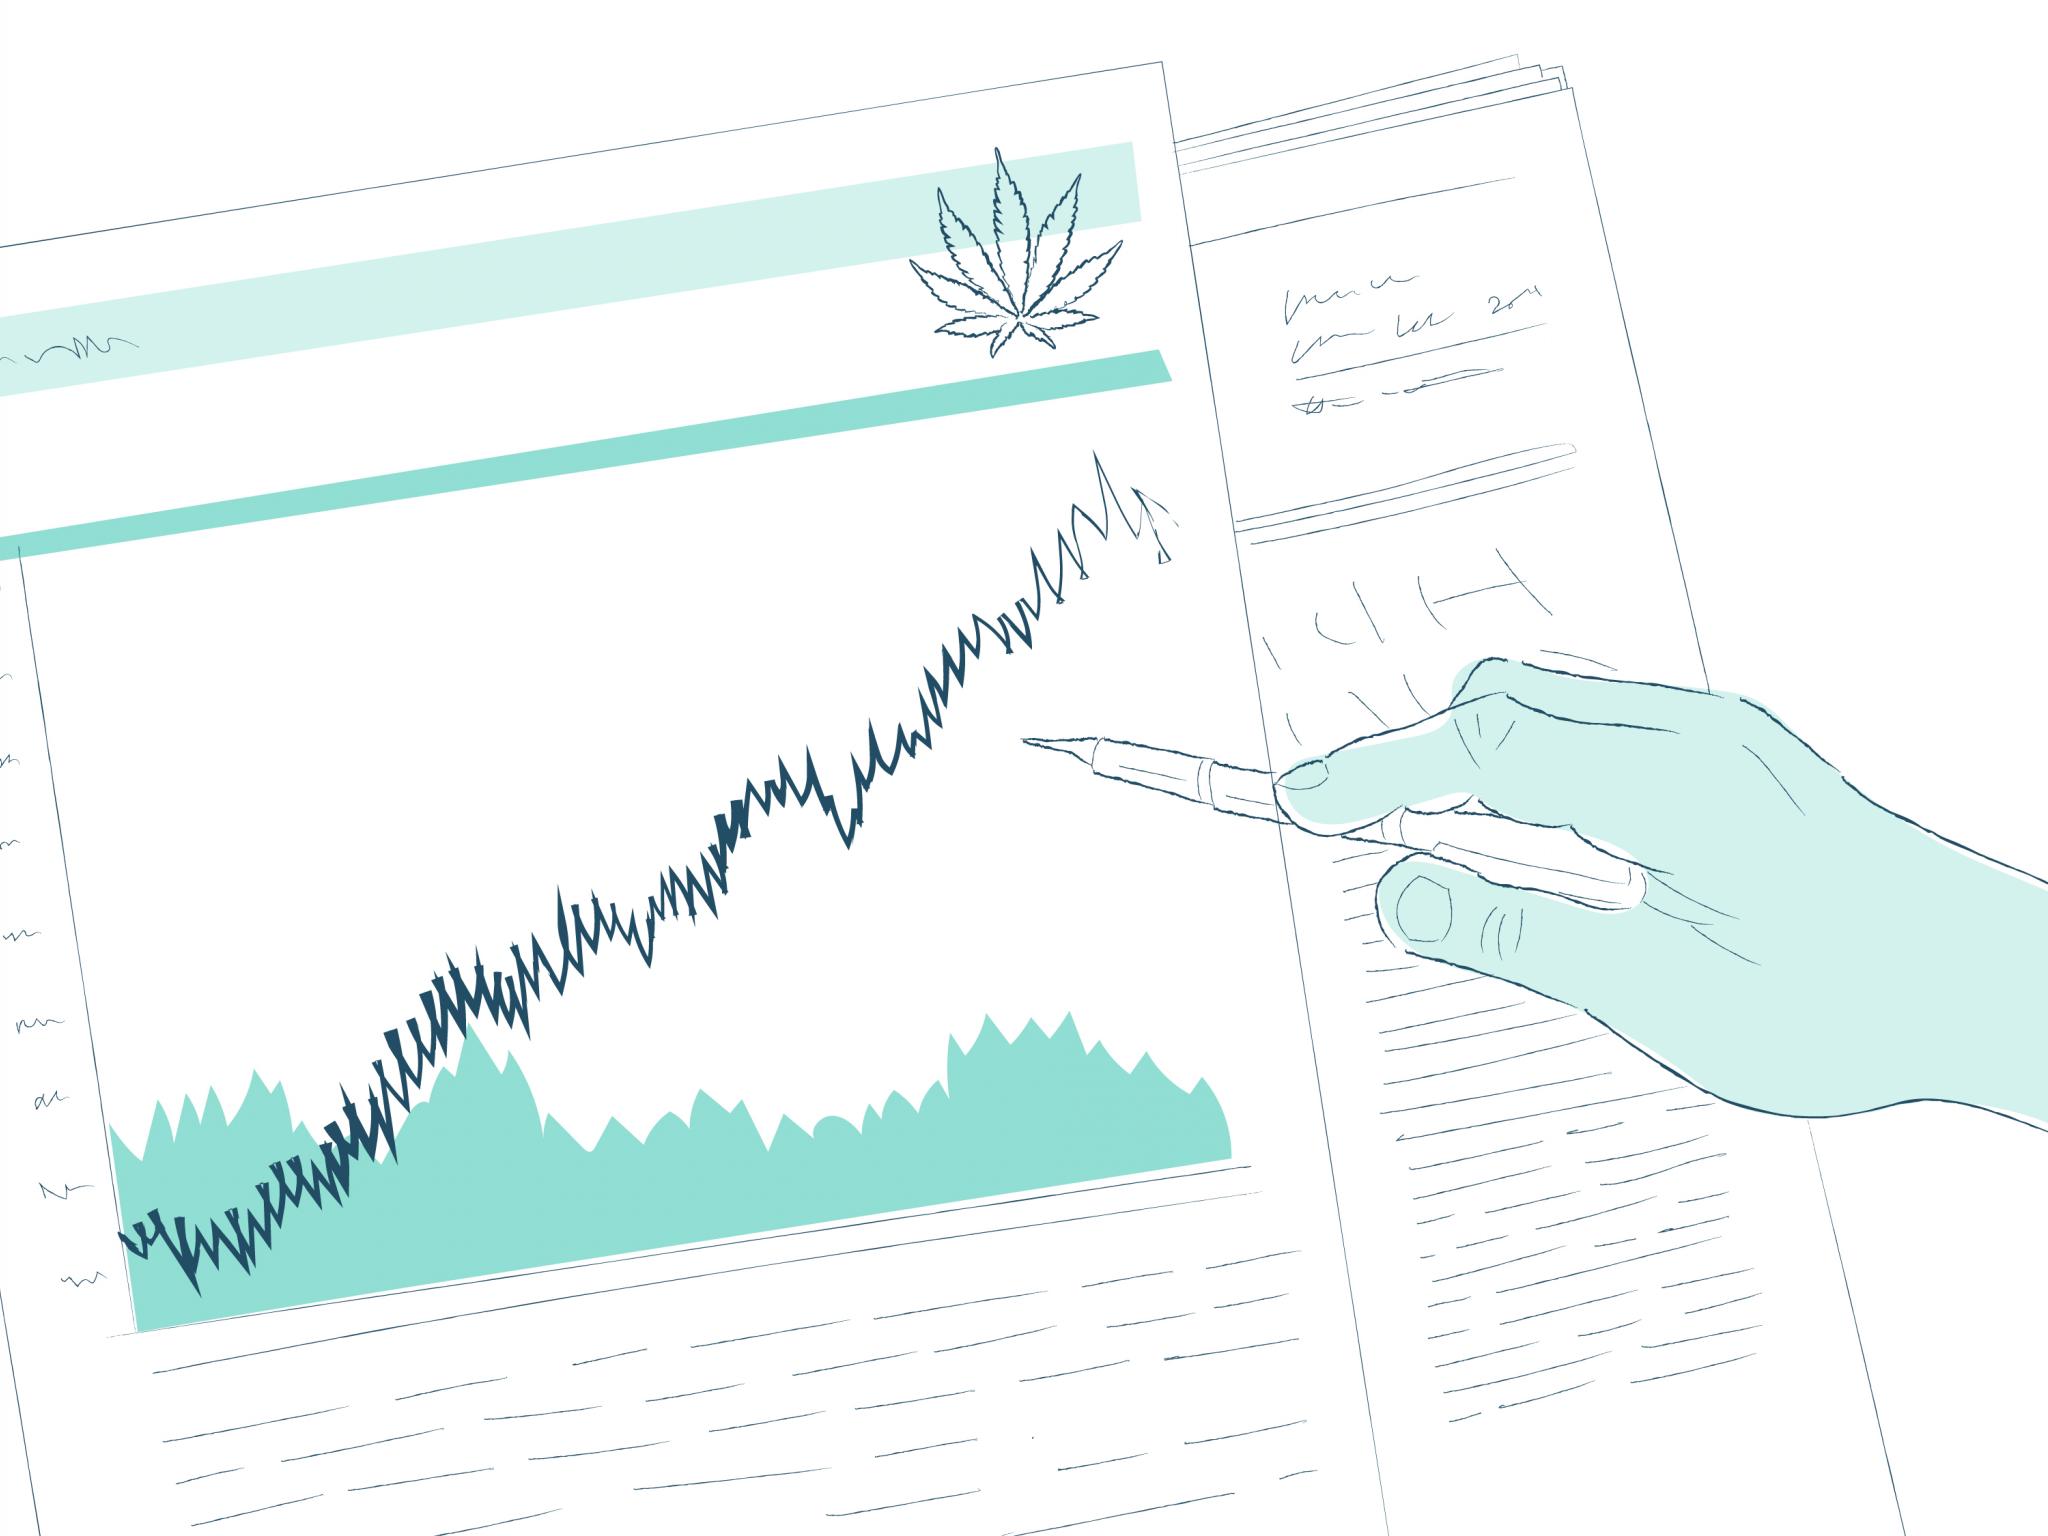  body--mind--charlottes-web-among-top-cannabis-stock-movers-on-august-6-2021 